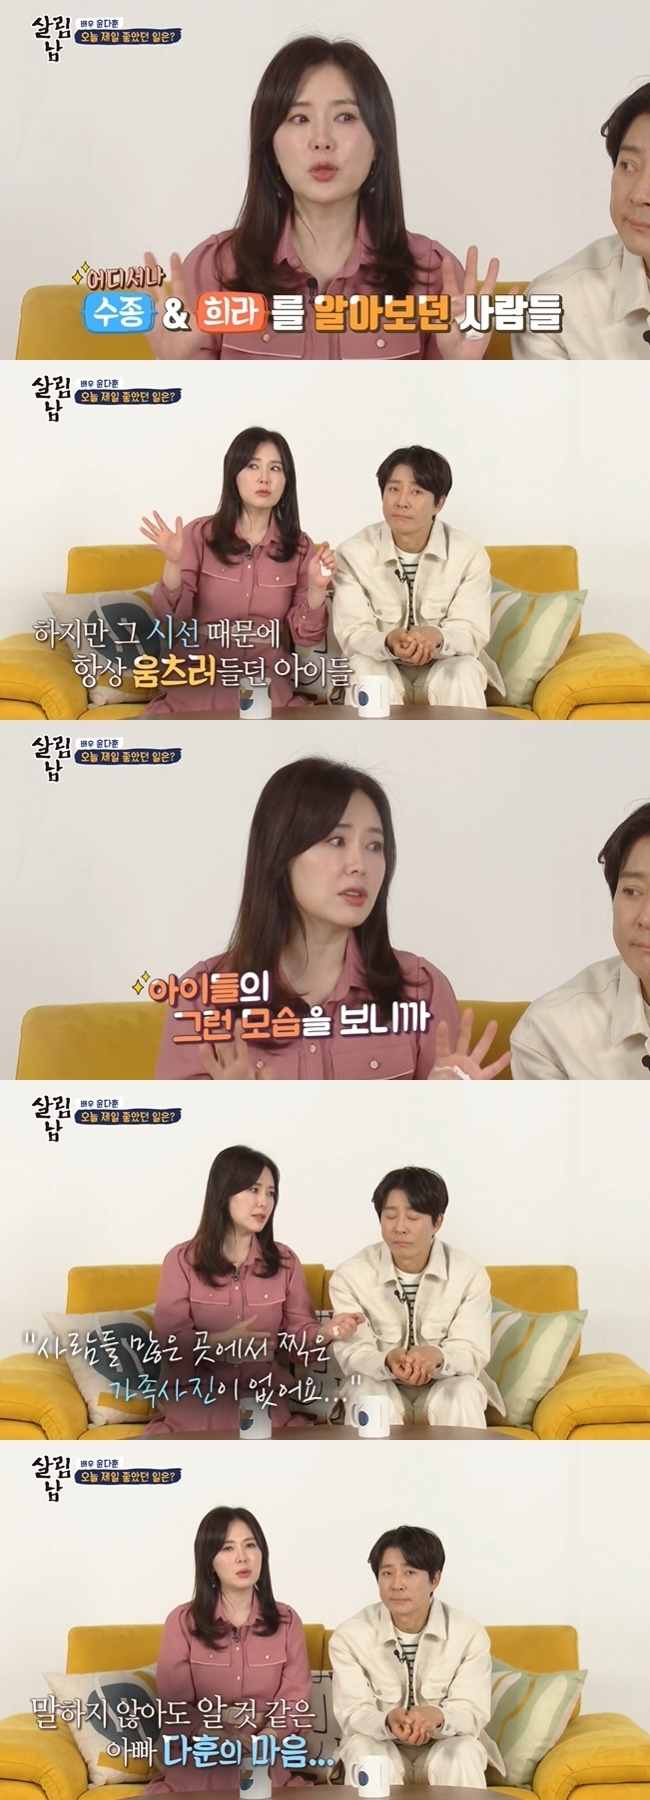 Ha Hee-ra was conscious of the peoples eyes, and I sympathized with the story of Yoon Da-hoon, who could not take pictures at will.On KBS 2TVs Season 2 of Living Men, which was broadcast on April 16, Yoon Da-hoon went out to the amusement park with his daughter Nam Kyeong-min and son-in-law Yoon Jin-sik.When he was a child, his father Yoon Da-hoon and Nam Kyeong-min, who had never been to an amusement park, showed up like a child with various memories with his father.Nam Kyeong-min, who came to eat money gas with his family, said, I wanted to try to eat money gas by gathering family members at the amusement park.When Yoon Da-hoon cut the money gas directly, Nam Kyeong-min was delighted that it was the most delicious pork gas in the world, and Yoon Da-hoon also enjoyed the depression was gone.When asked what was the best thing in the amusement park, Nam Kyeong-min said, I have never taken pictures with my father in many places.It was awkward and awkward, he said. I was a little uncomfortable when I took pictures in many places, but now I was happy to be able to say my Father without paying attention.I came to make my father happy, but I think I was happier. I thought to my daughter, I didnt play father. I was so sorry for my daughter when I saw her like it too much while watching the tulip garden.I was the happiest moment when I saw my daughter happy. Haheera, who was tearing at the video, said, I think I know what kind of mind it is. I was careful because the children knew what kind of job their mother and father were.I dont think I could easily say that I was going to take a photo of the memorial, because I saw the children watching and watching.